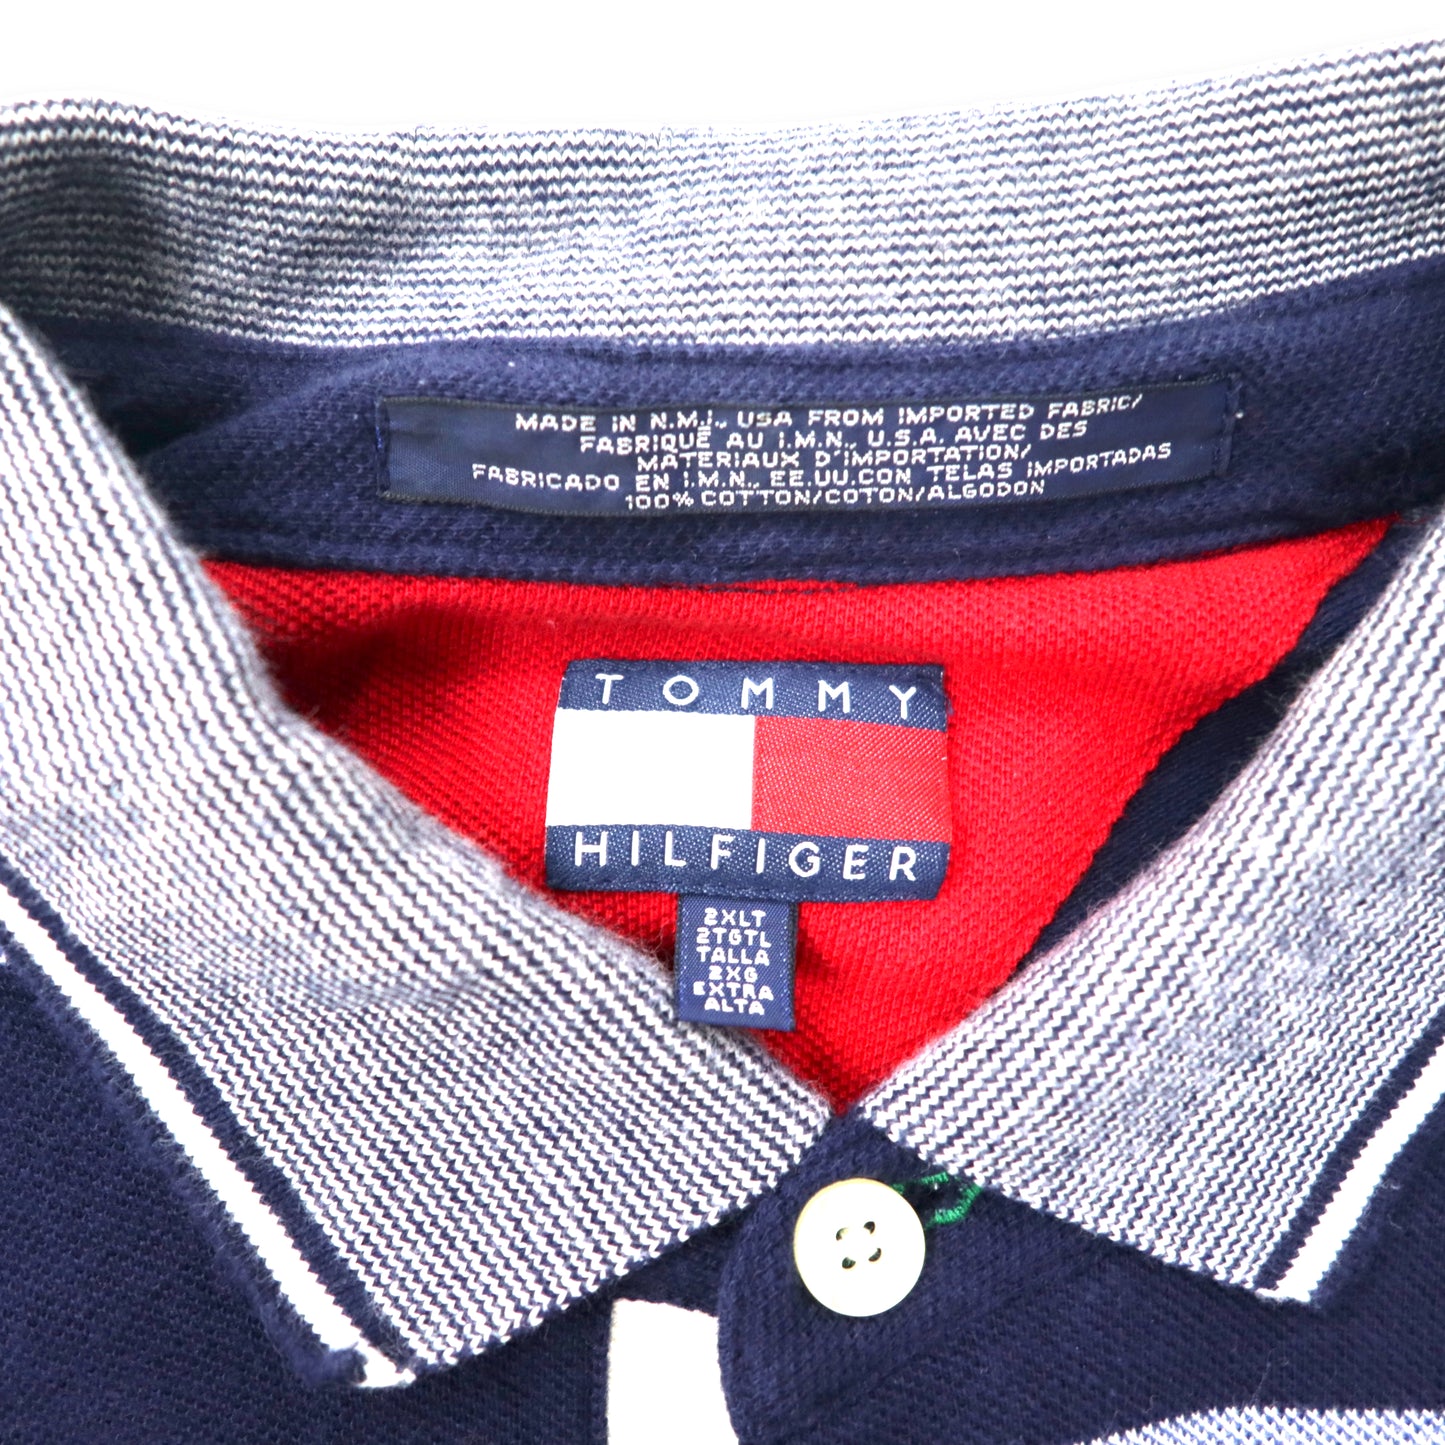 USA MADE TOMMY HILFIGER 90's Striped Rugby Shirt Long Sleeve Polo